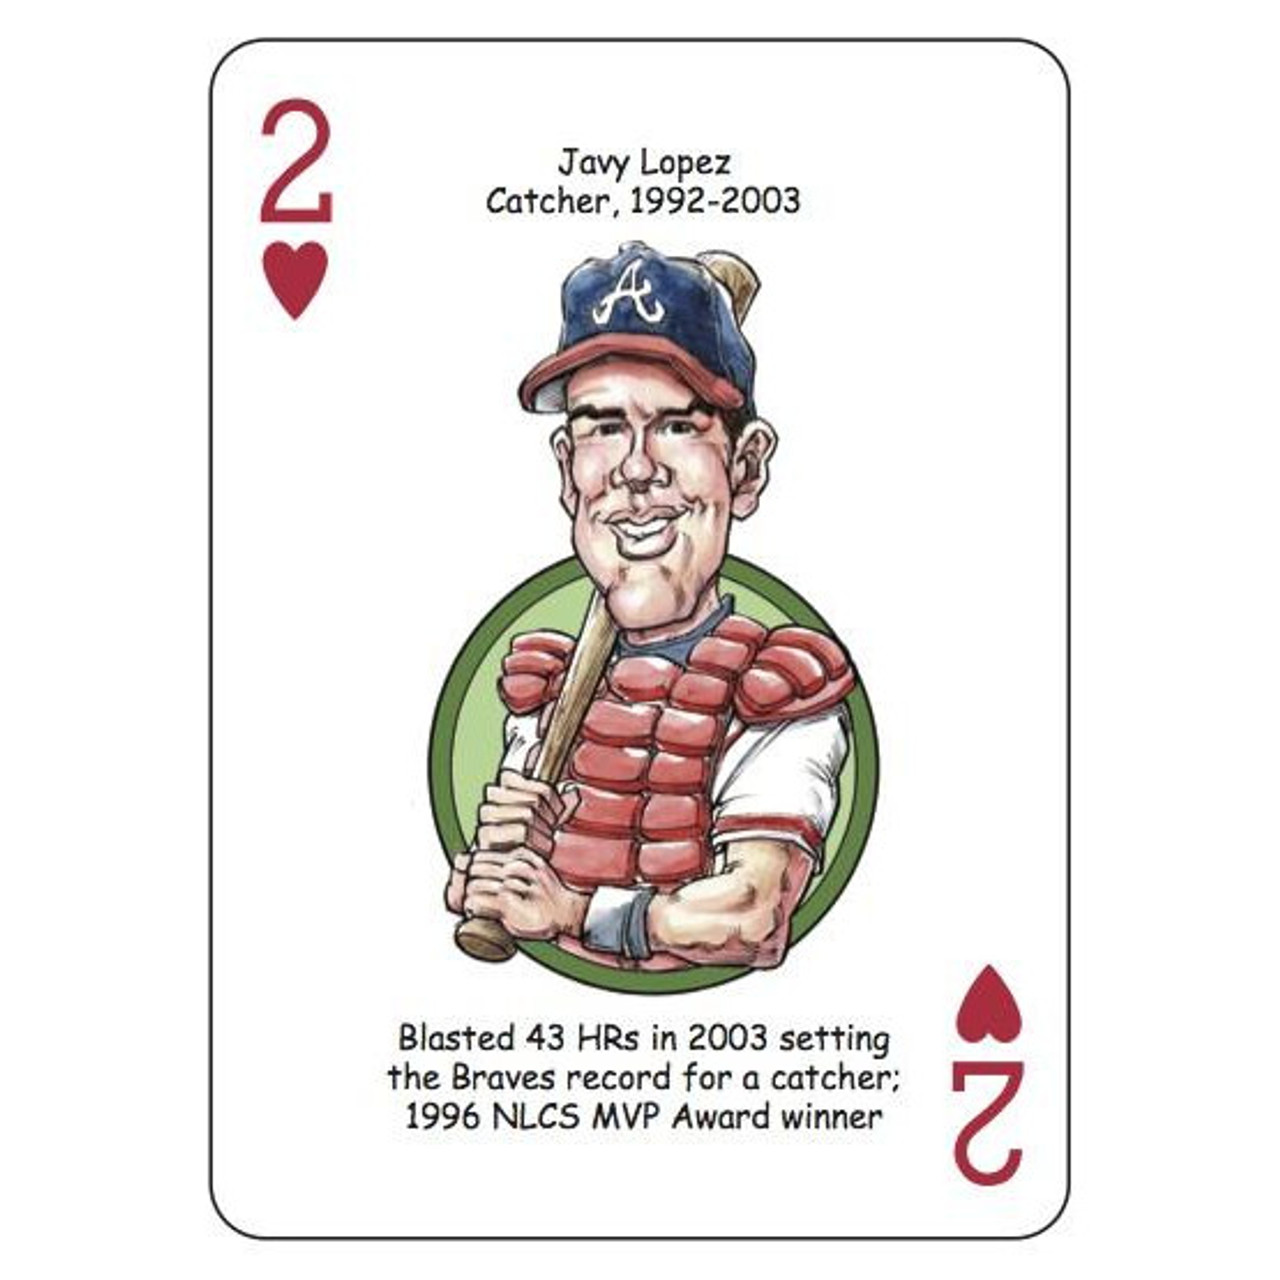 https://cdn11.bigcommerce.com/s-m8z8akveha/images/stencil/1280x1280/products/7503/36718/Hero-Decks-Caricature-Playing-Cards-For-Atlanta-Braves-Fans__S_4__14213.1590012605.jpg?c=1